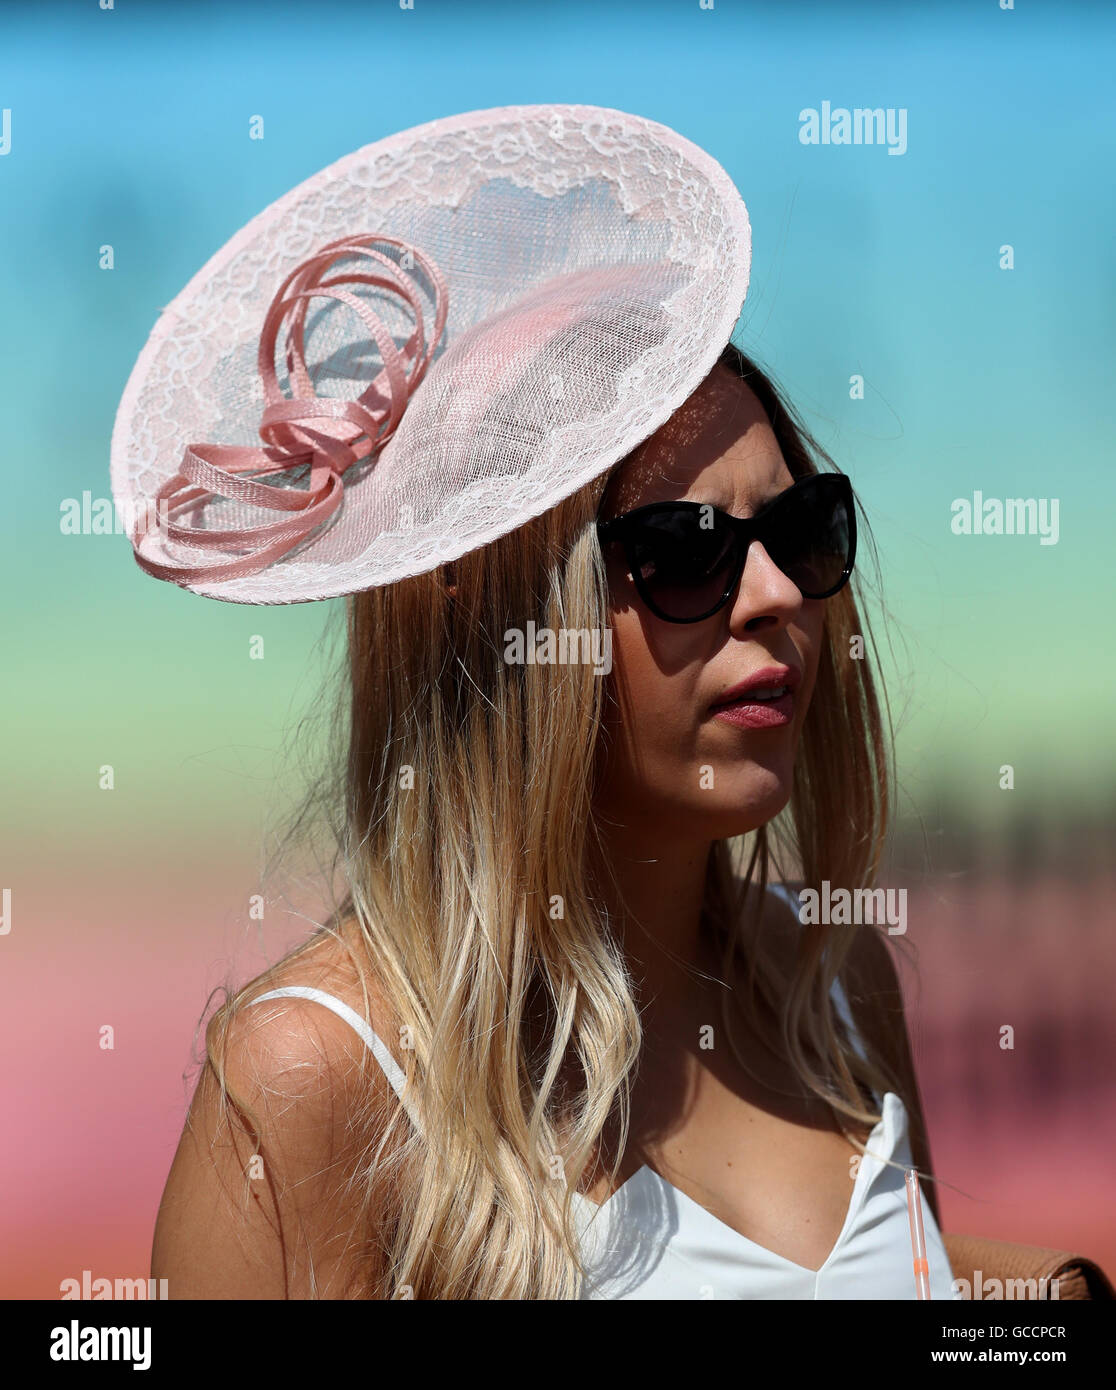 A Racegoer during Gentleman's Day of The Moet & Chandon July Festival at Newmarket Racecourse. Stock Photo